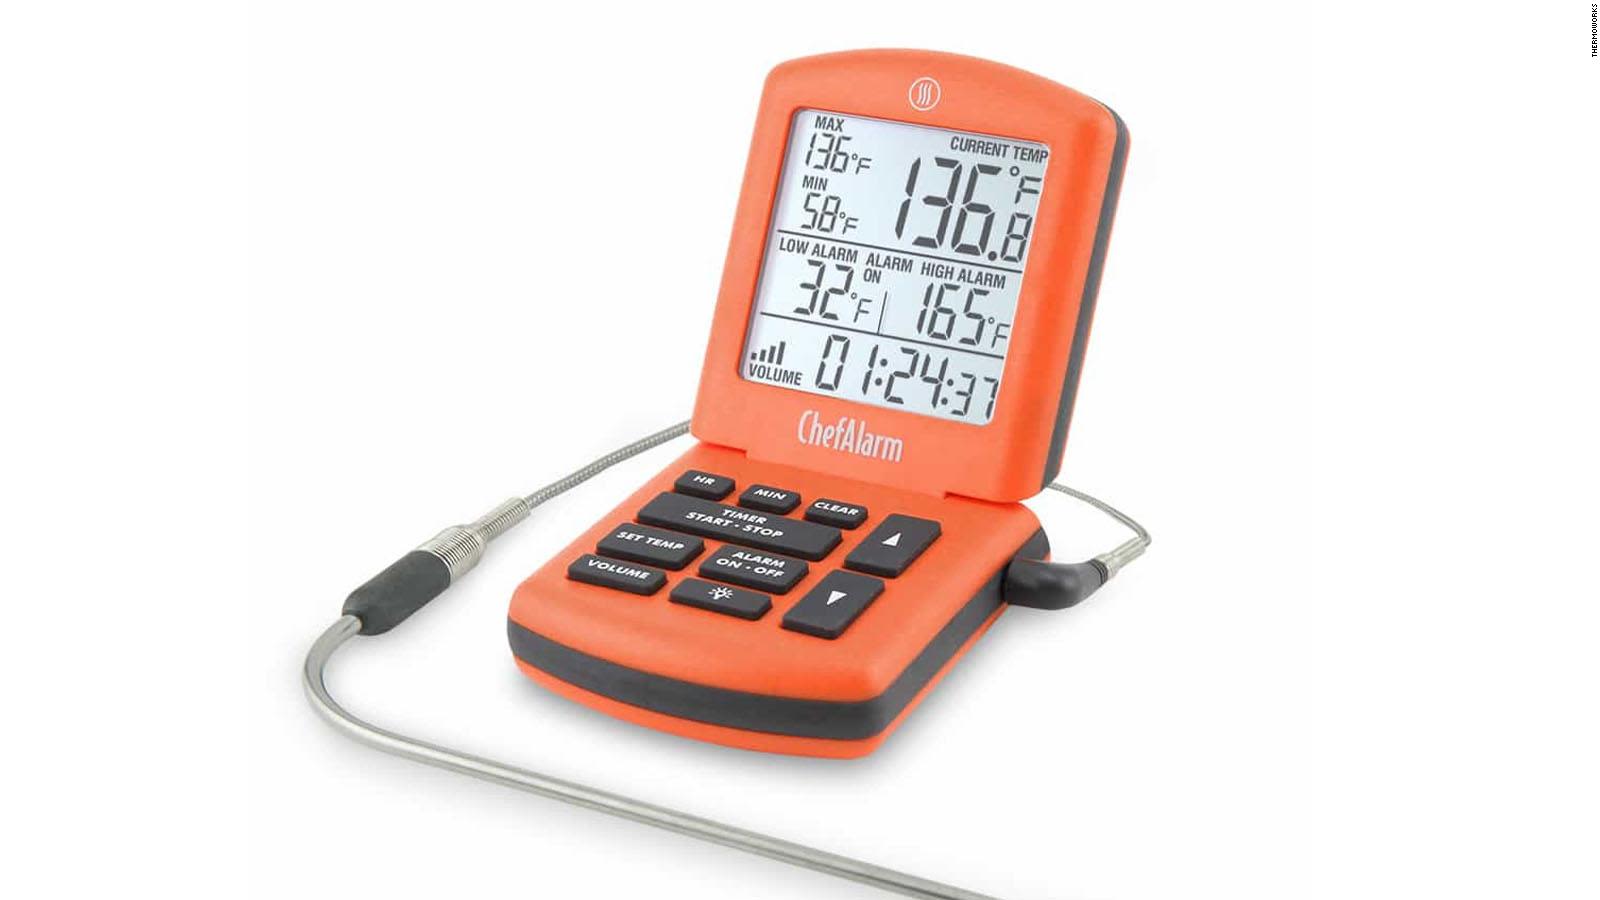 https://media.cnn.com/api/v1/images/stellar/prod/underscored-best-tested-products-meat-thermometer-thermoworks-chef-alarm-product-card.jpeg?q=h_900,w_1600,x_0,y_0